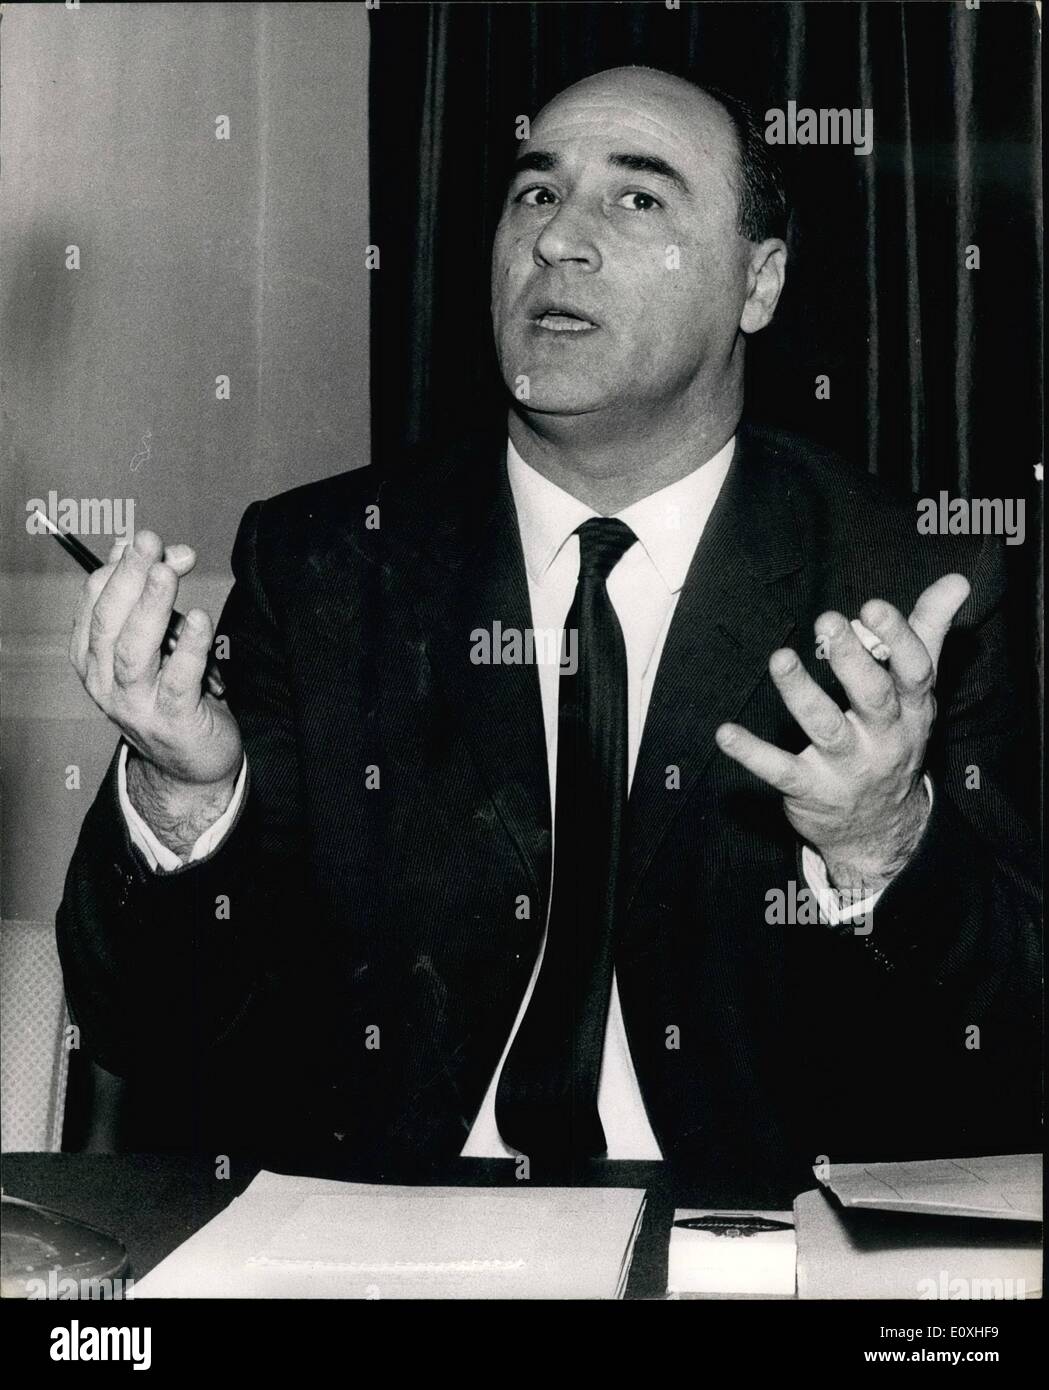 Jan. 01, 1967 - Delegates From Malta At Press Conference: The delegation from Malta, led by Dr. Edgar Mizzi, Deputy Crown General, Malta, who arrived in London yesterday to ''appeal to the sympathy of the British People'', following Britain's decision to reduce the number of British troops in Melta by two-thirds, this afternoon attend a Press Conference at the Criterion Restaurant, London, which was also attended by the High Commissioner for Malta in London, Mr. John Axisa. Photo Shows Dr. Edgar Mizzi, speaking at today's Press Conference. Stock Photo